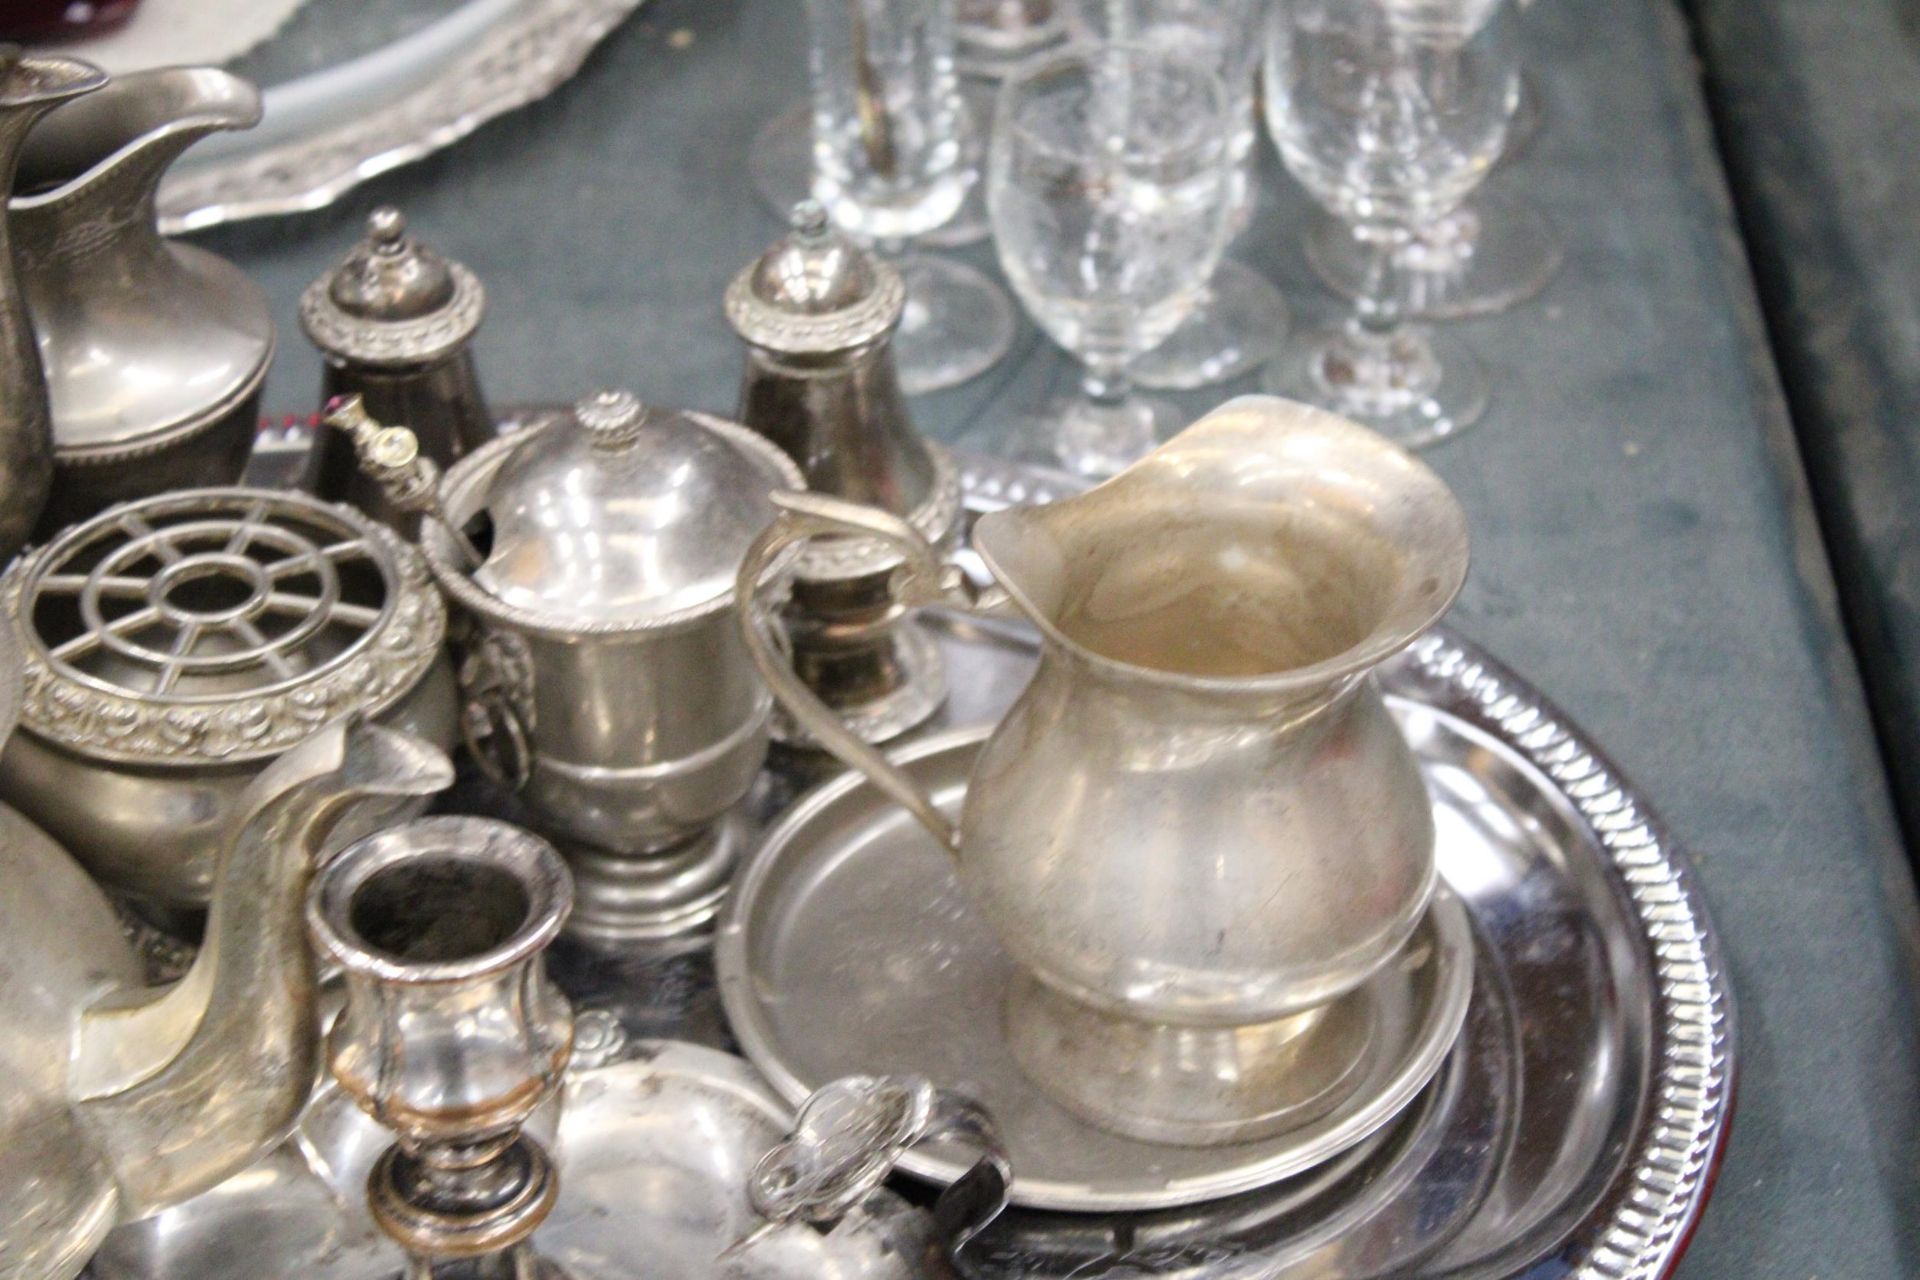 A QUANTITY OF SILVER PLATED ITEMS TO INCLUDE, A TRAY, TEAPOT, COFFEE POT, CANDLESTICK, JUGS, A CRUET - Image 3 of 6